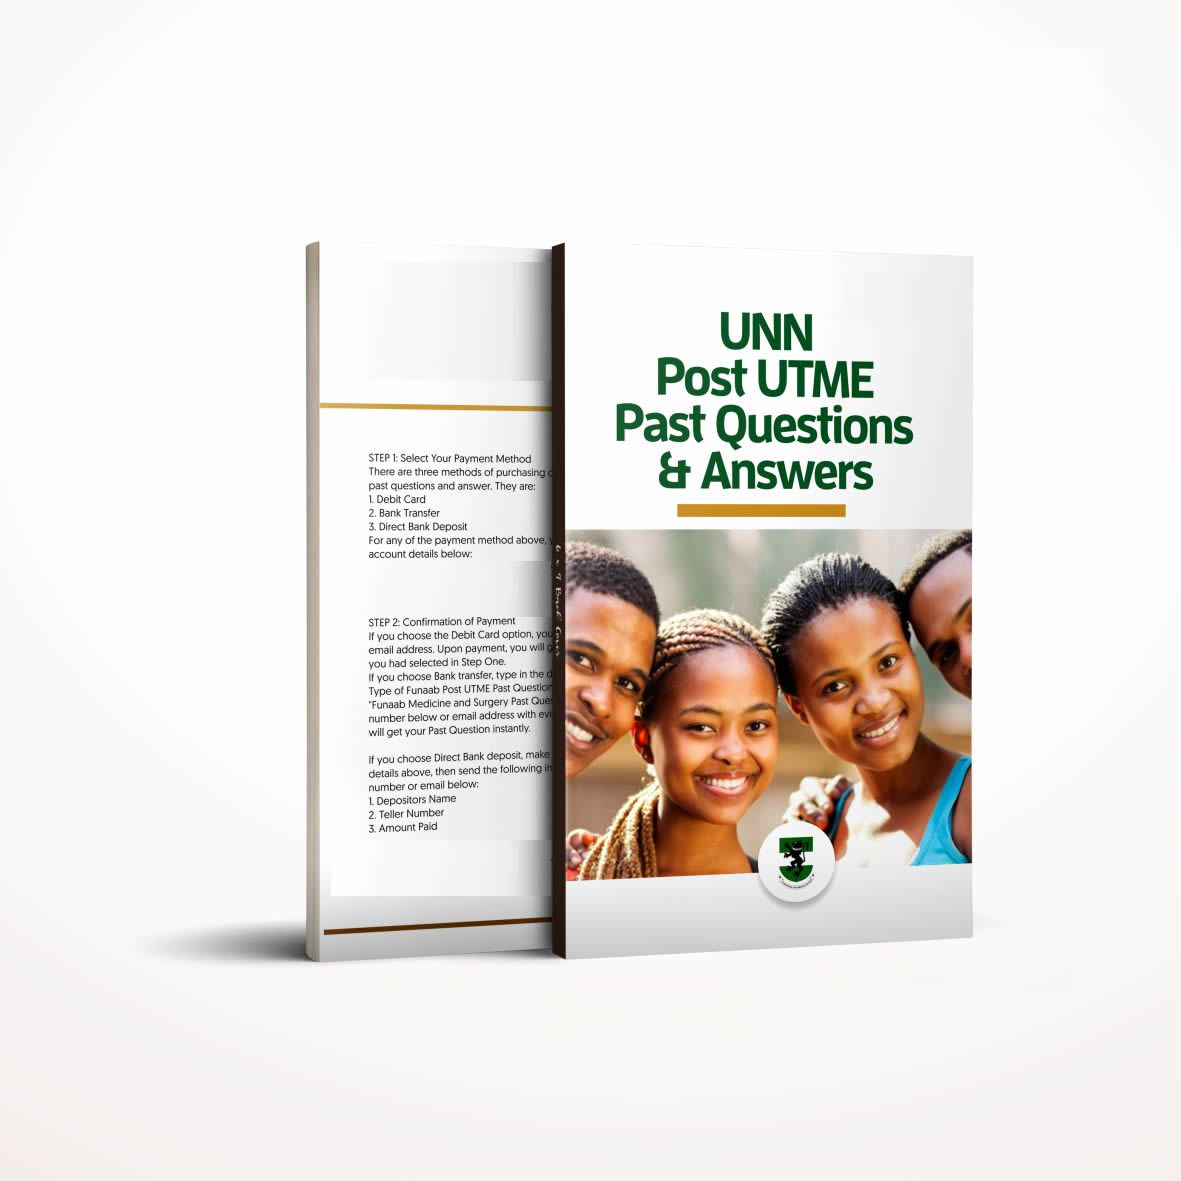 unn post utme past questions and answers